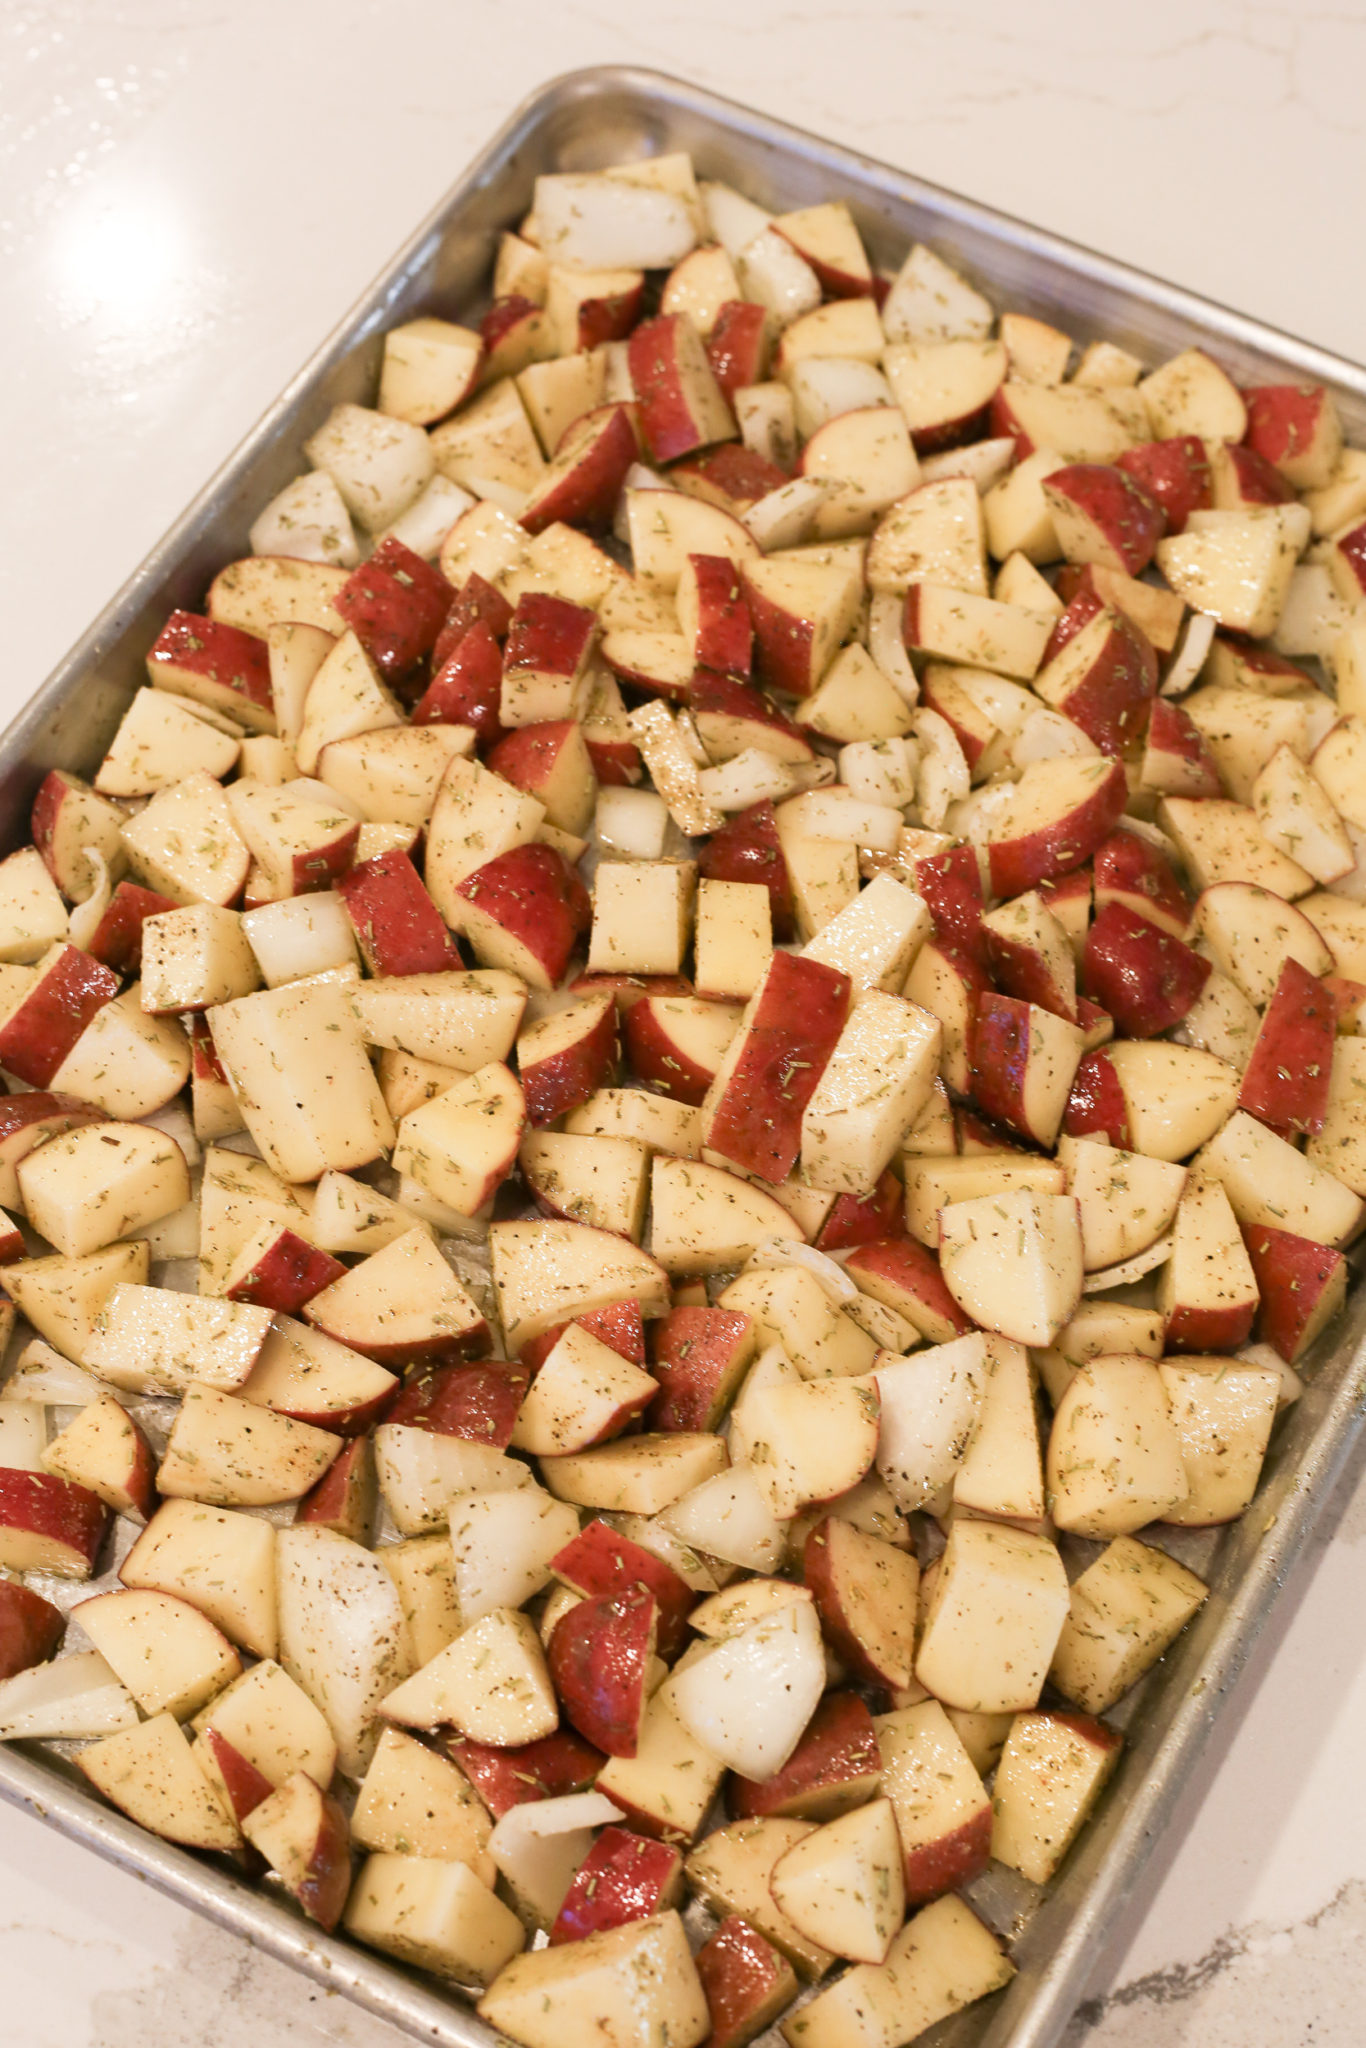 Quick Roman Chicken Breasts With Rosemary Potatoes - The Unlikely Hostess